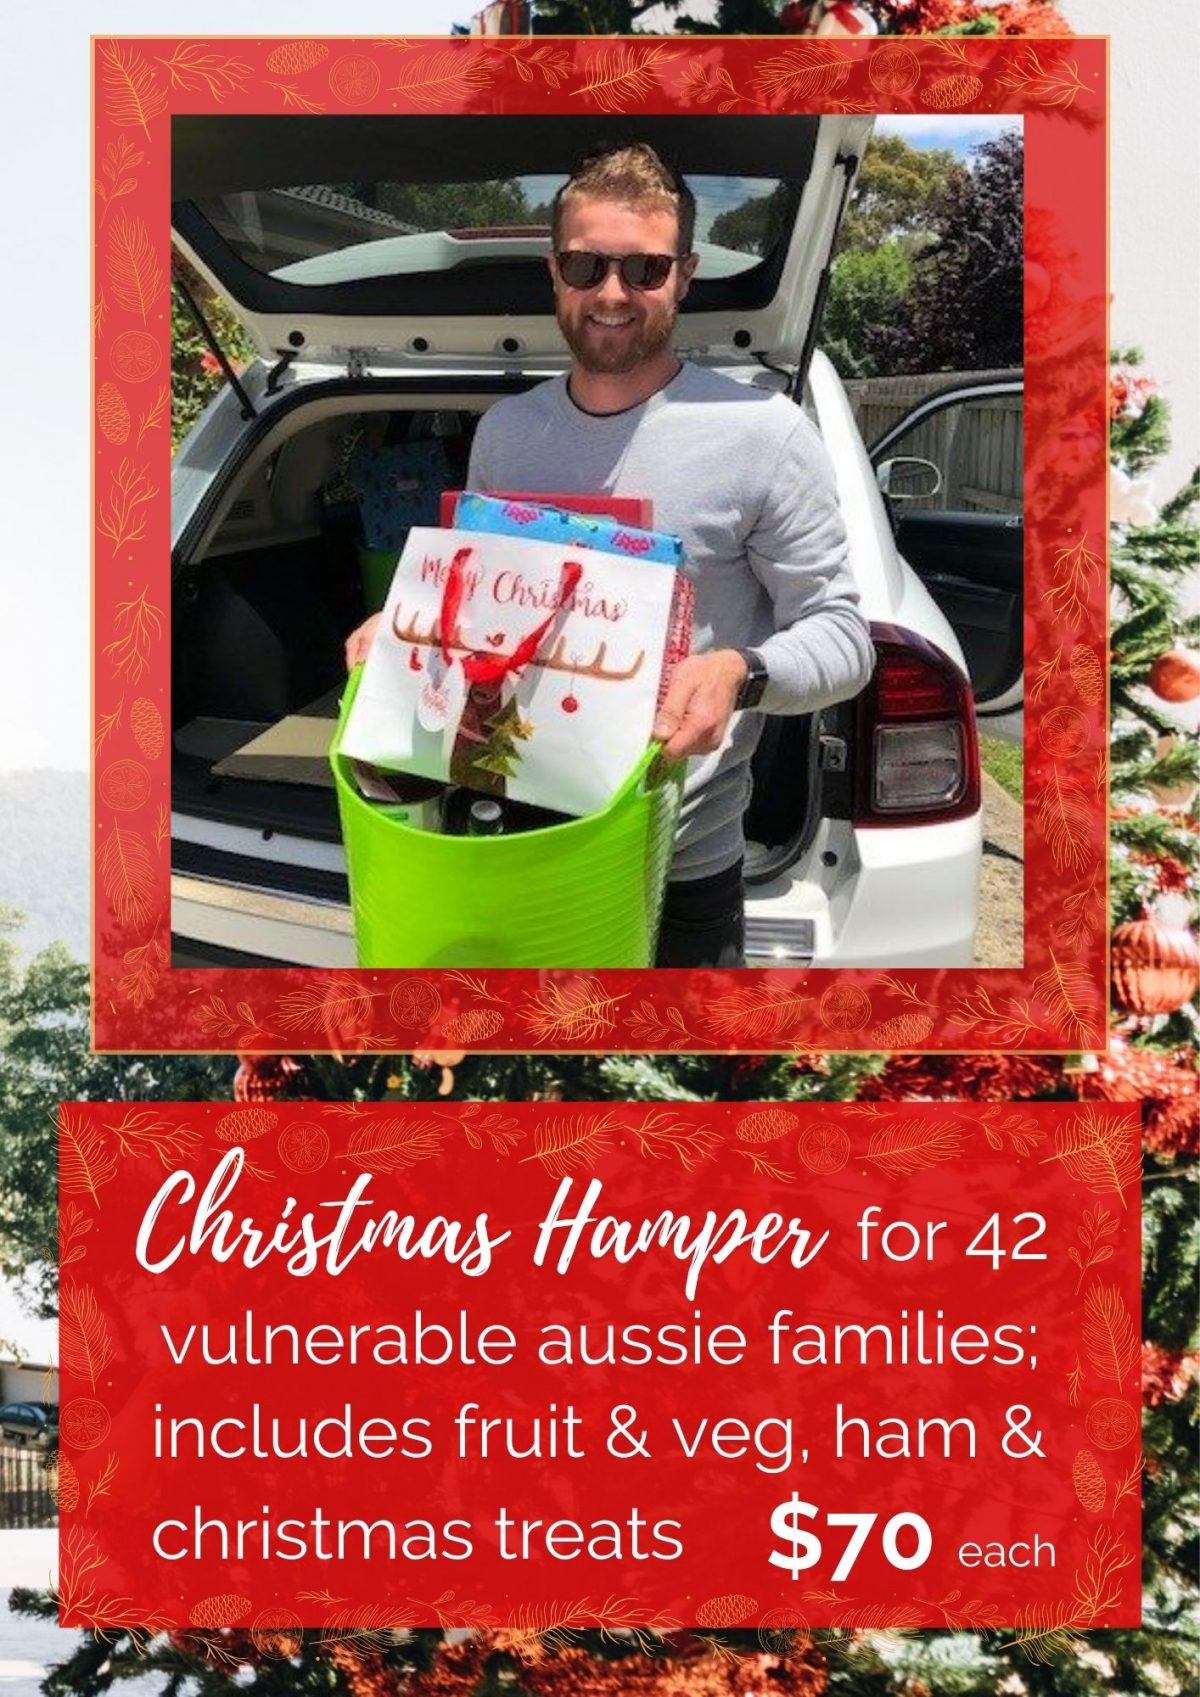 Christmas Hamper for 42 vulnerable aussie families; includes fruit and veg, ham and christmas treats. $70 each